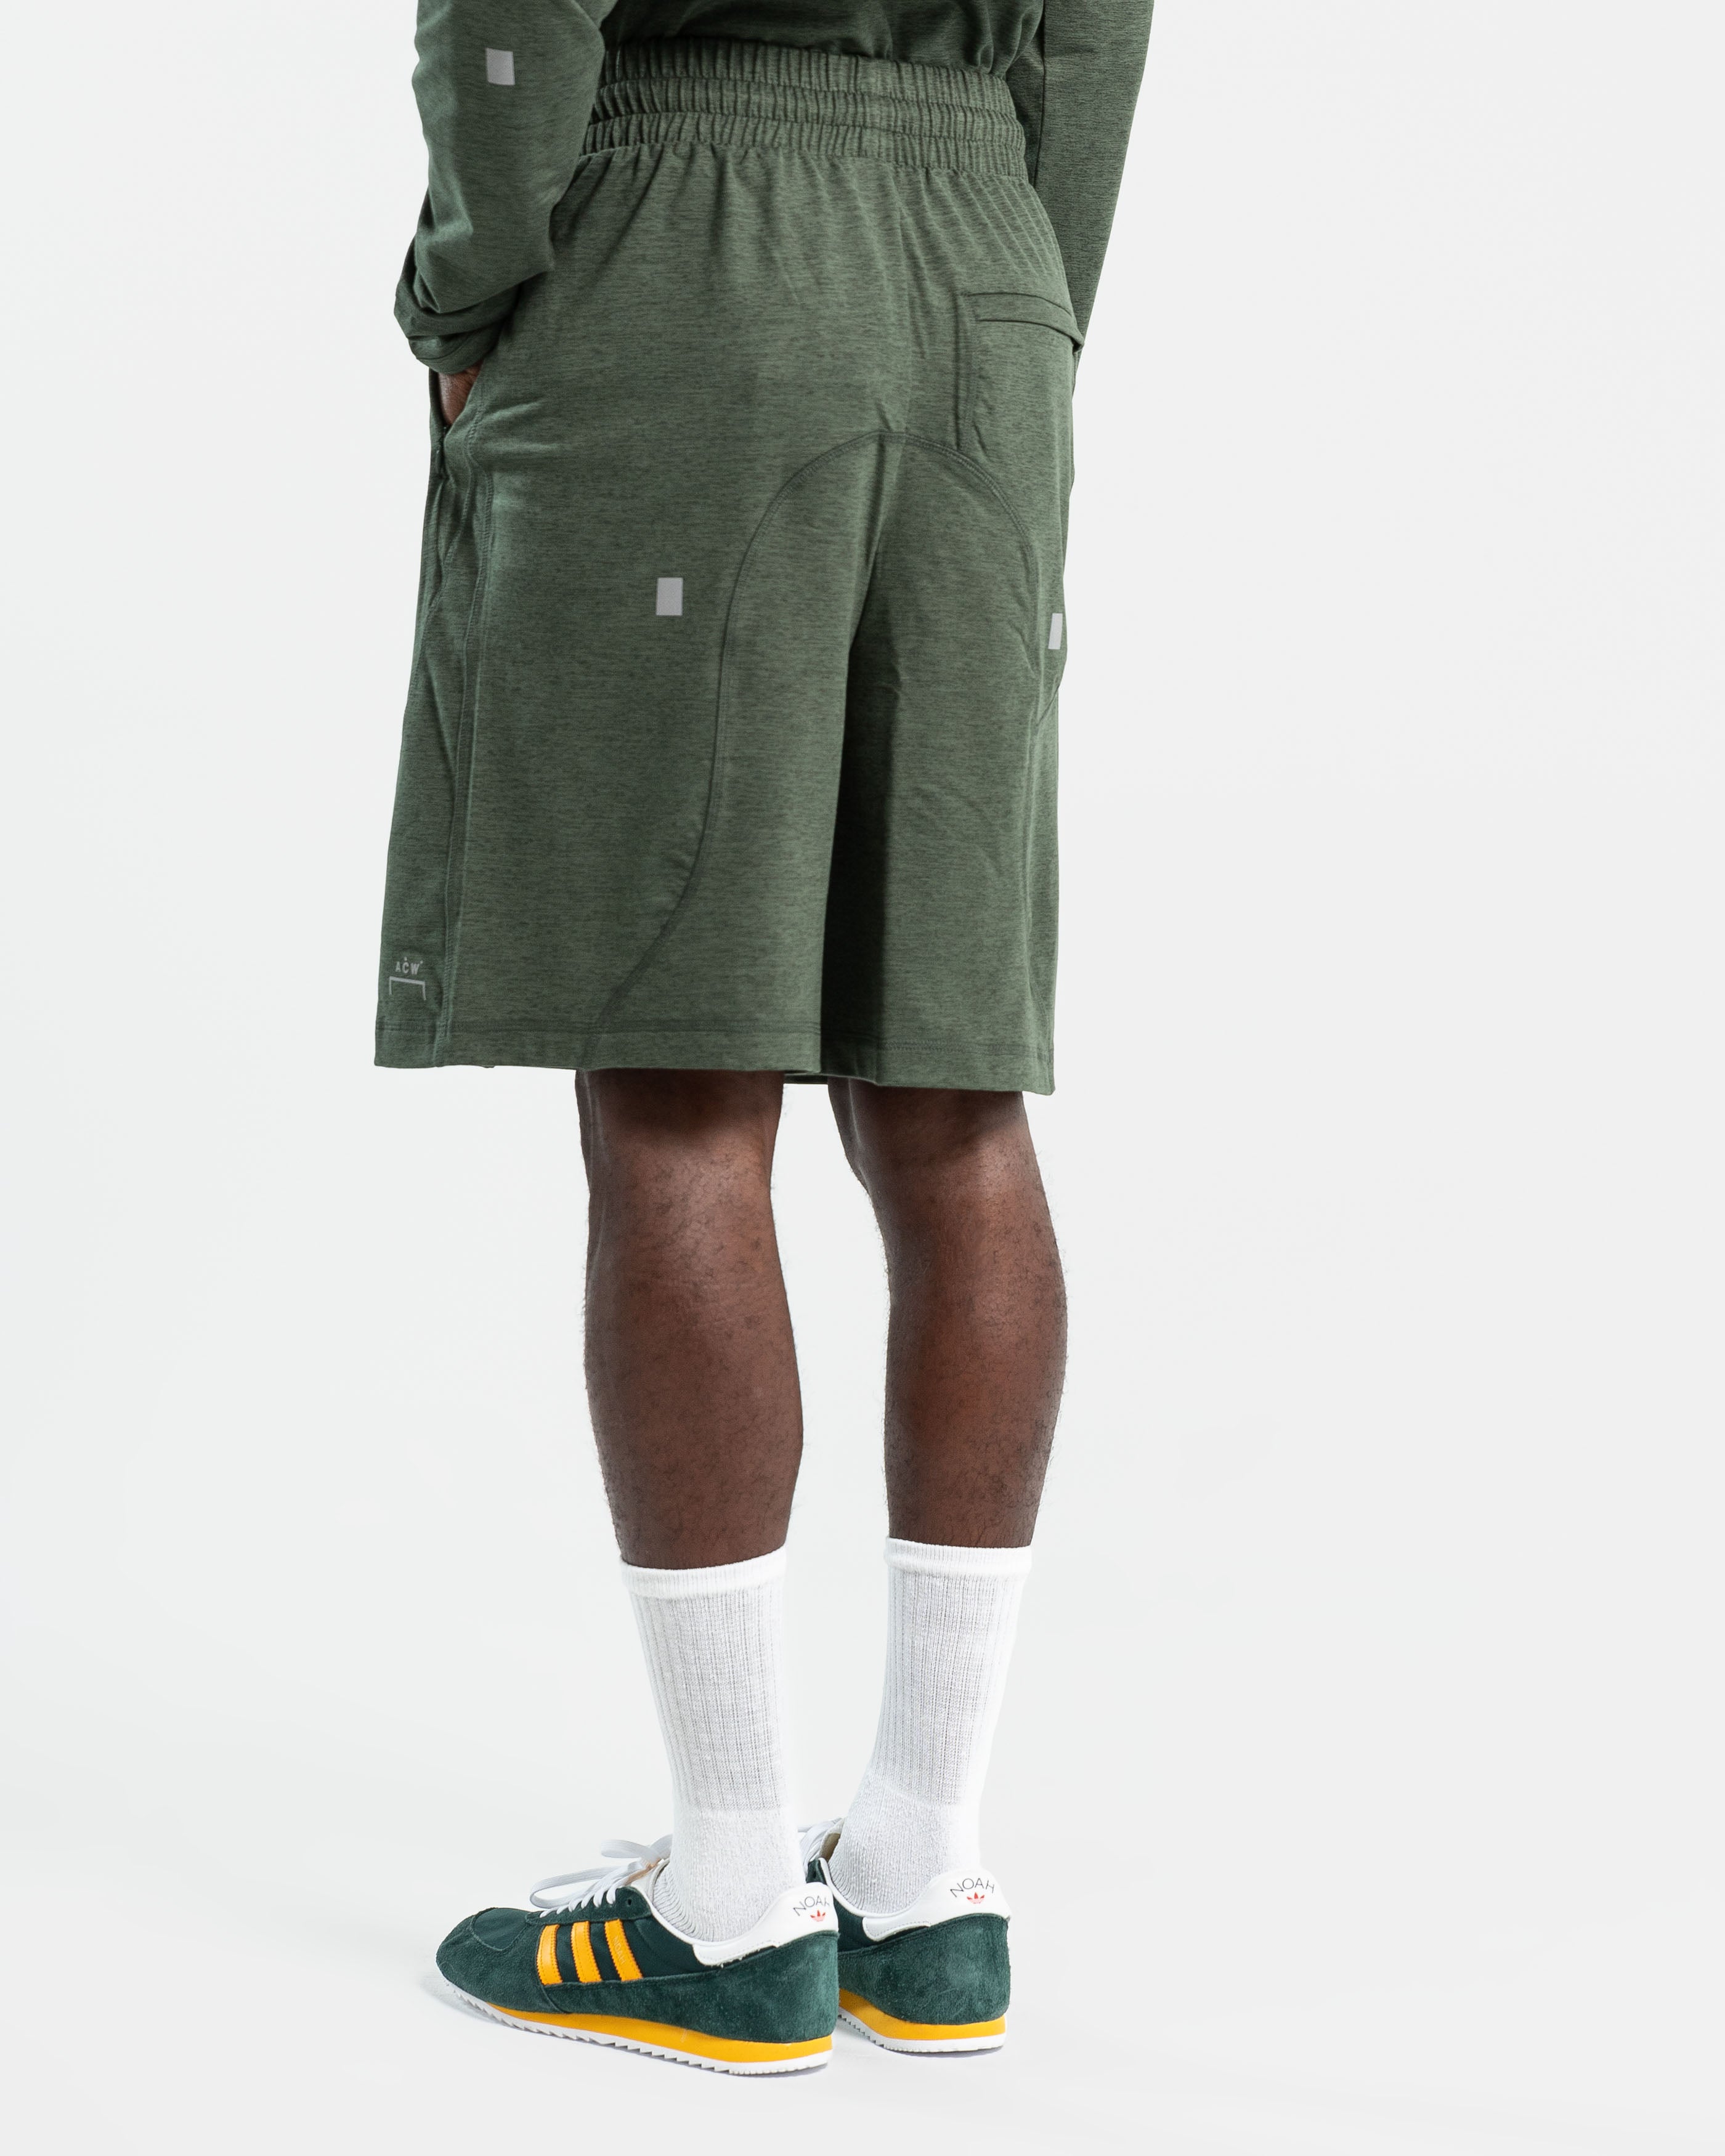 Body Map Short in Forest Green